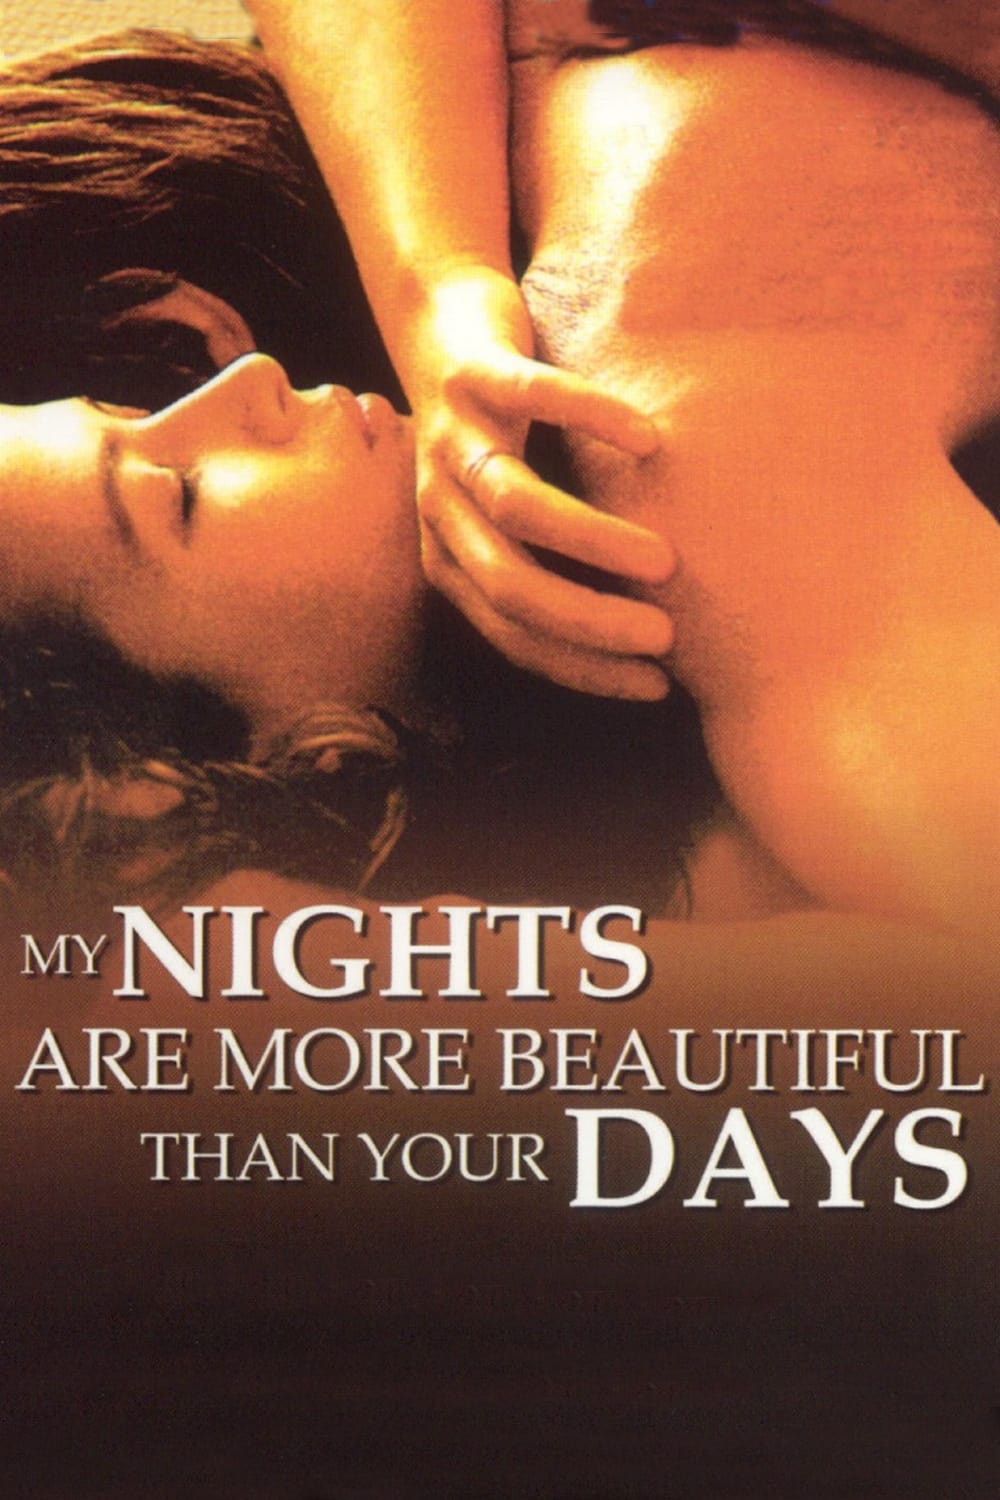 My Nights Are More Beautiful Than Your Days (1989)